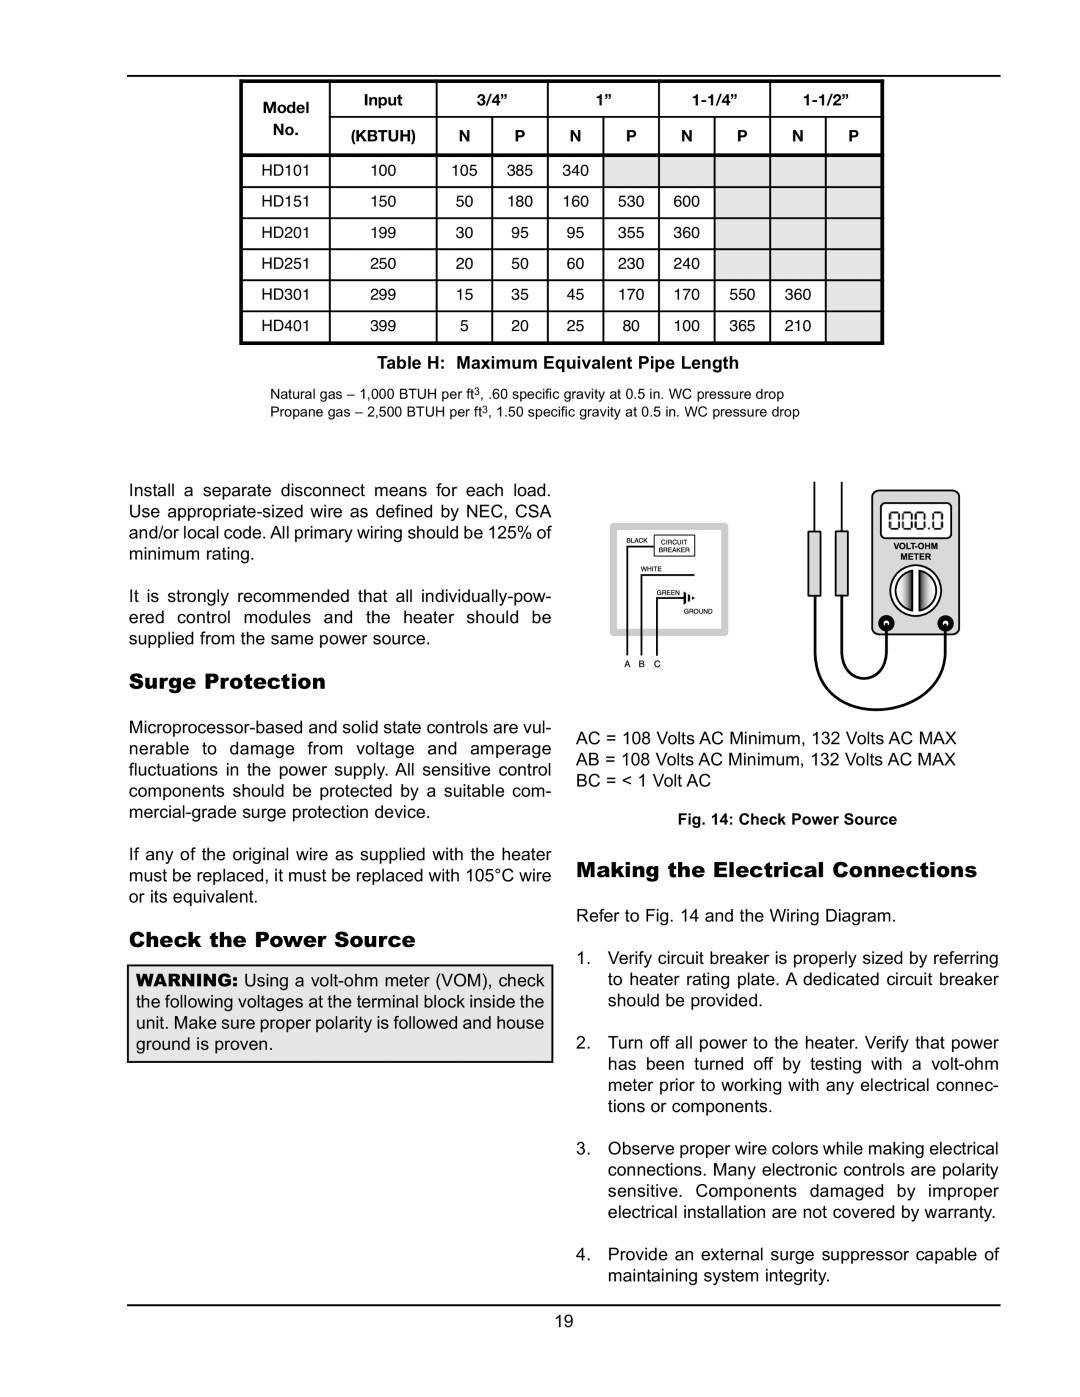 Raypak HD101, HD401 operating instructions Surge Protection, Check the Power Source, Making the Electrical Connections 